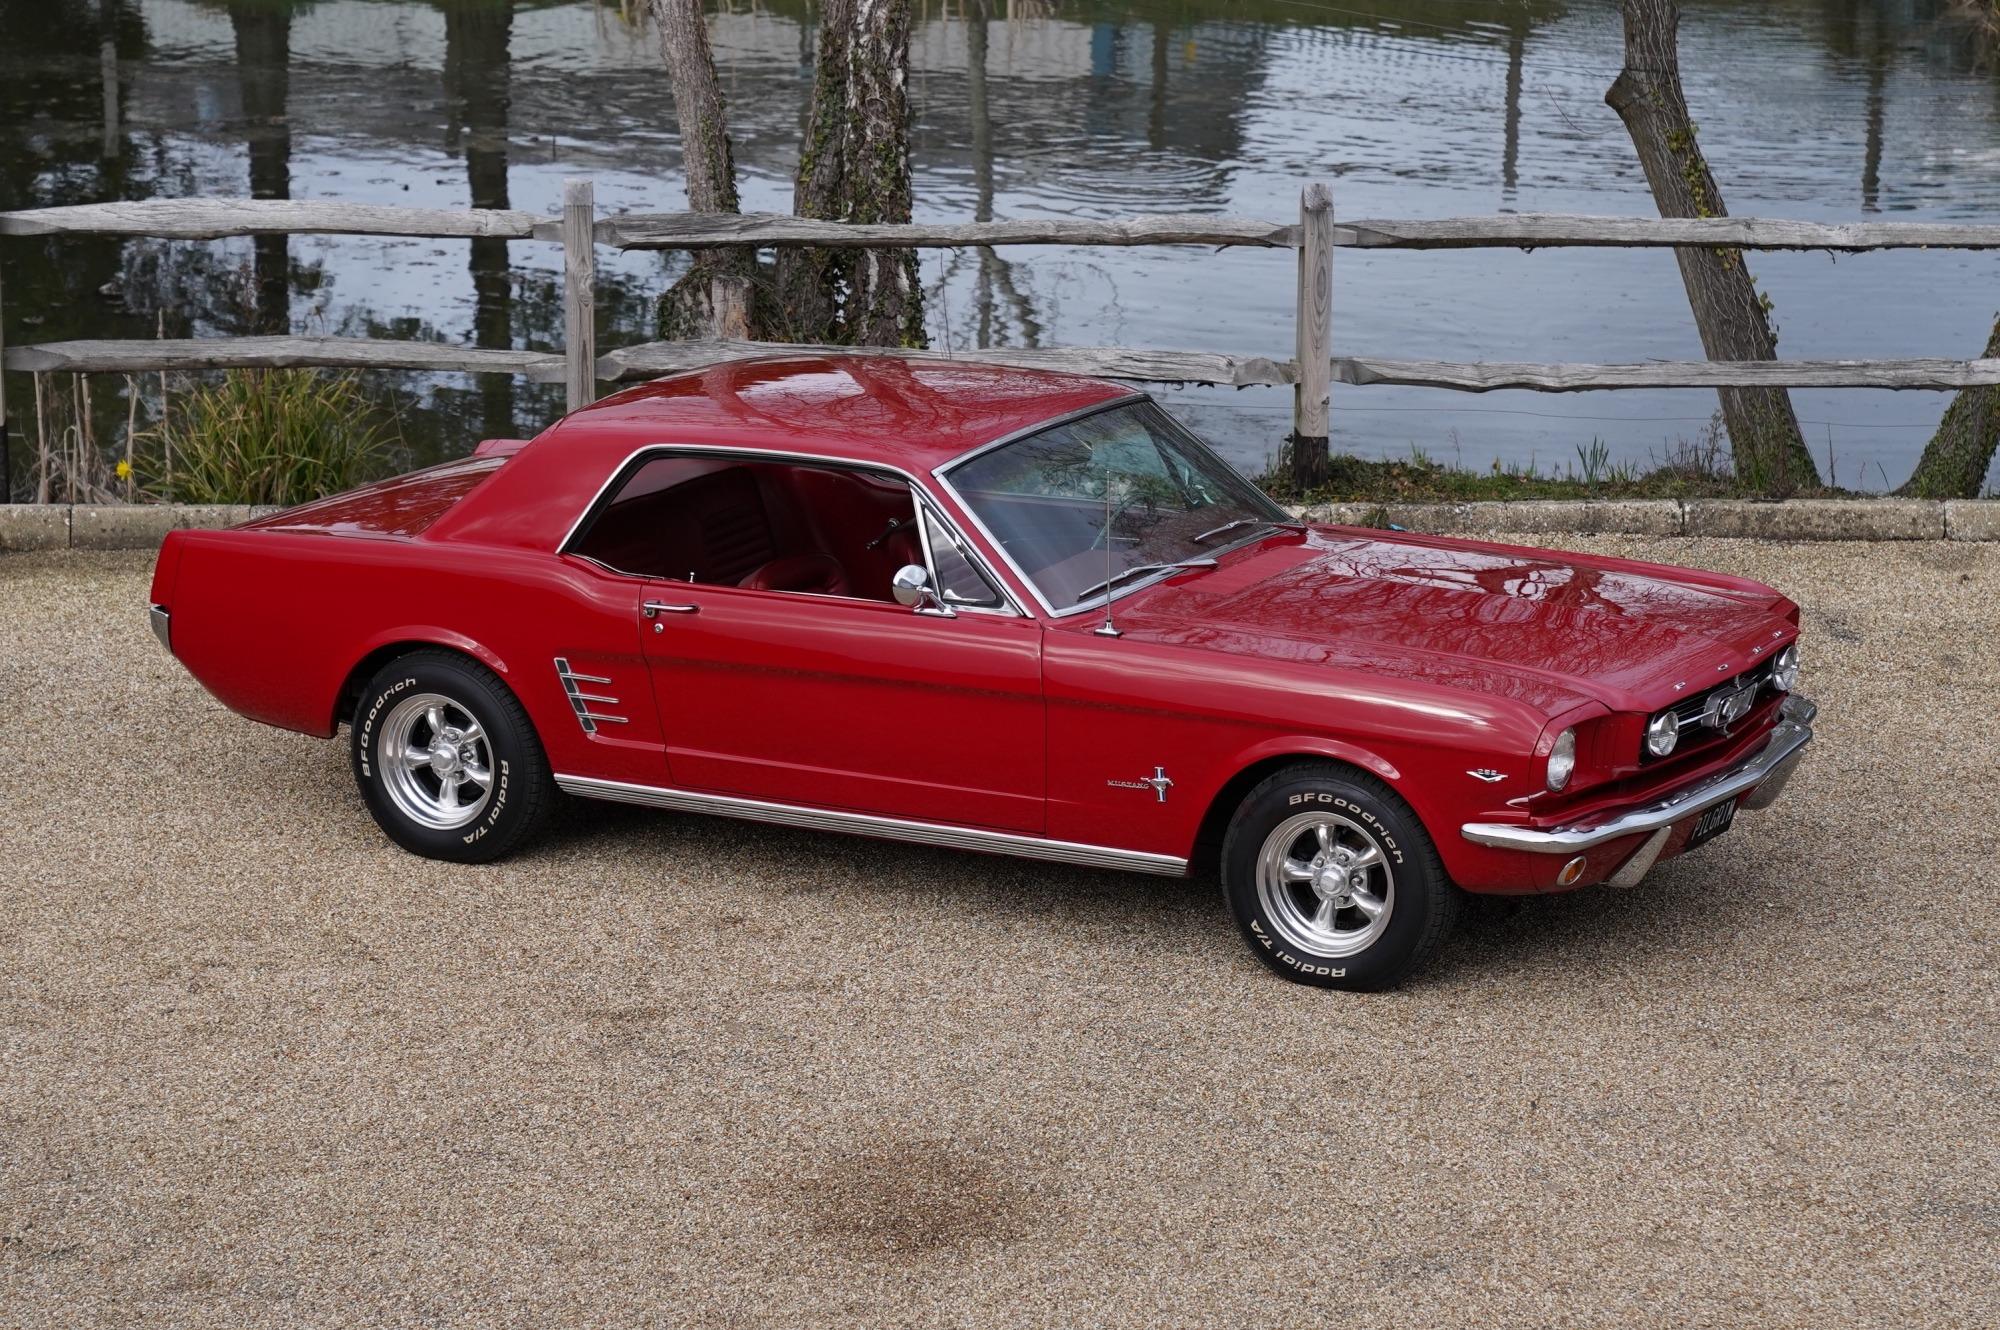 huh Uartig bejdsemiddel 1966 Ford Mustang 289 Coupe Auto Candy Apple Red - Muscle Car